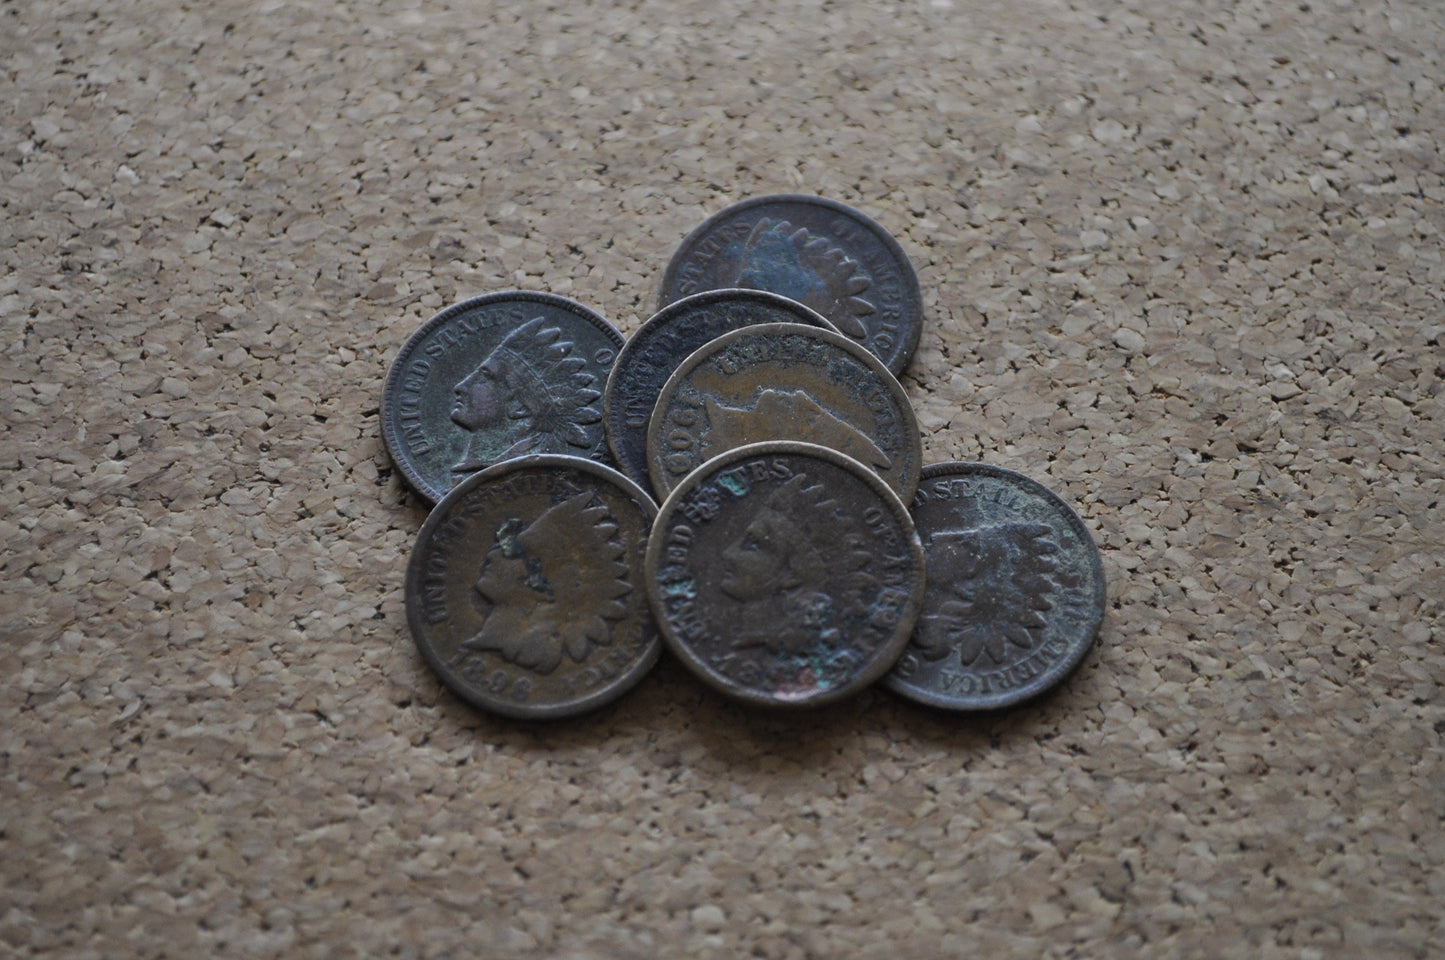 Lot of 10 Indian Head Pennies - Lower grade due to damage, corrosion or stuck on gunk - Unsearched / uncleaned